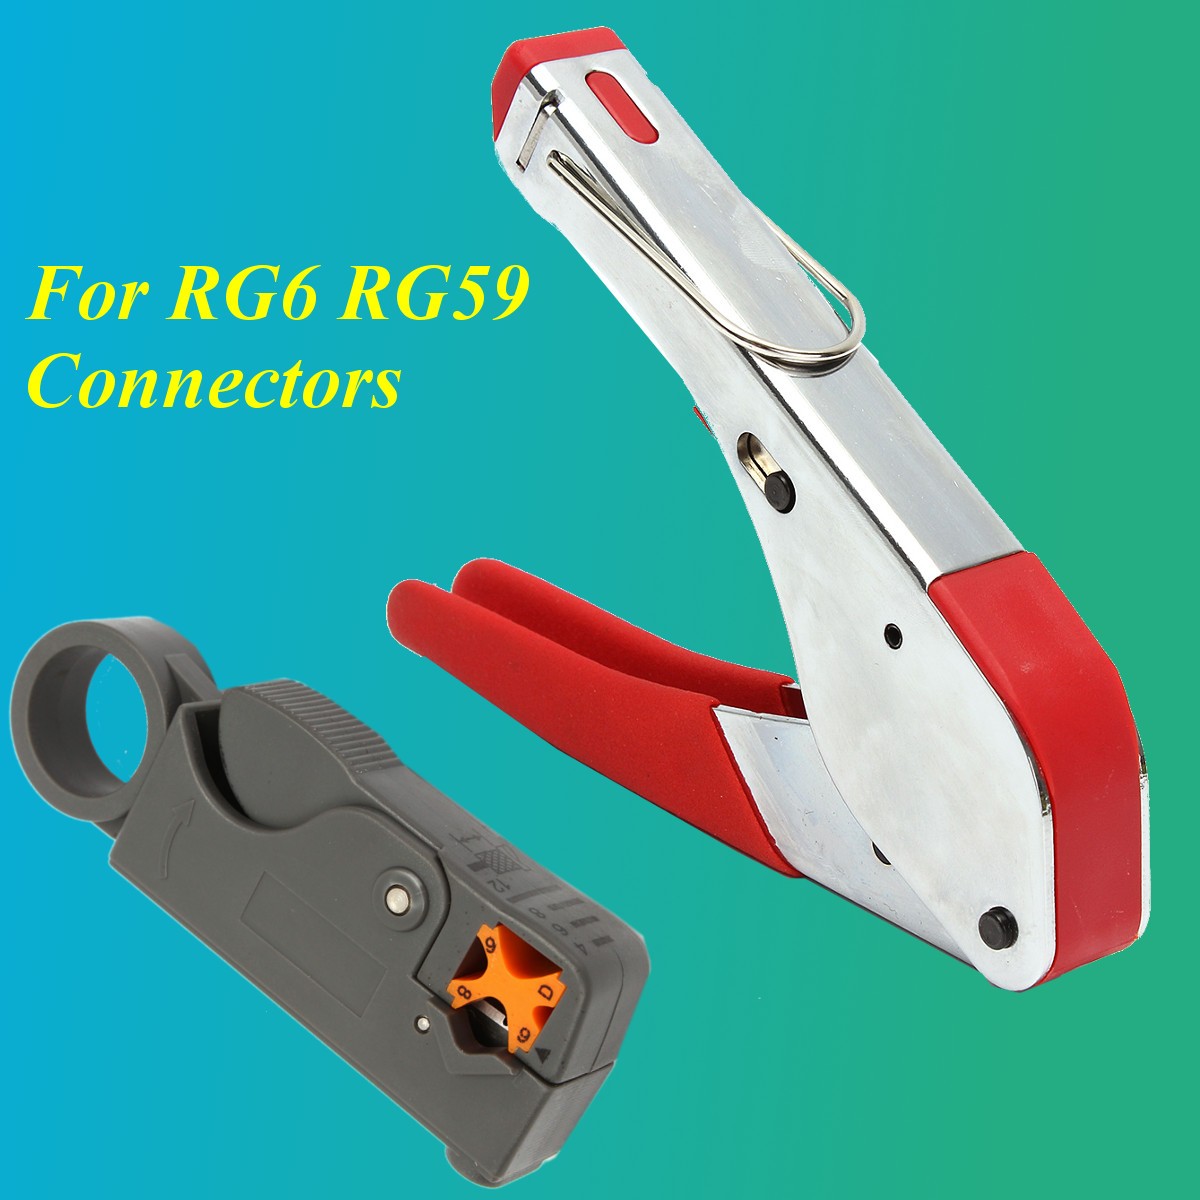 Tool-Coax-Rg59-Rg6-F-Connector-Fitting-Crimper-Cable-Kit-1160326